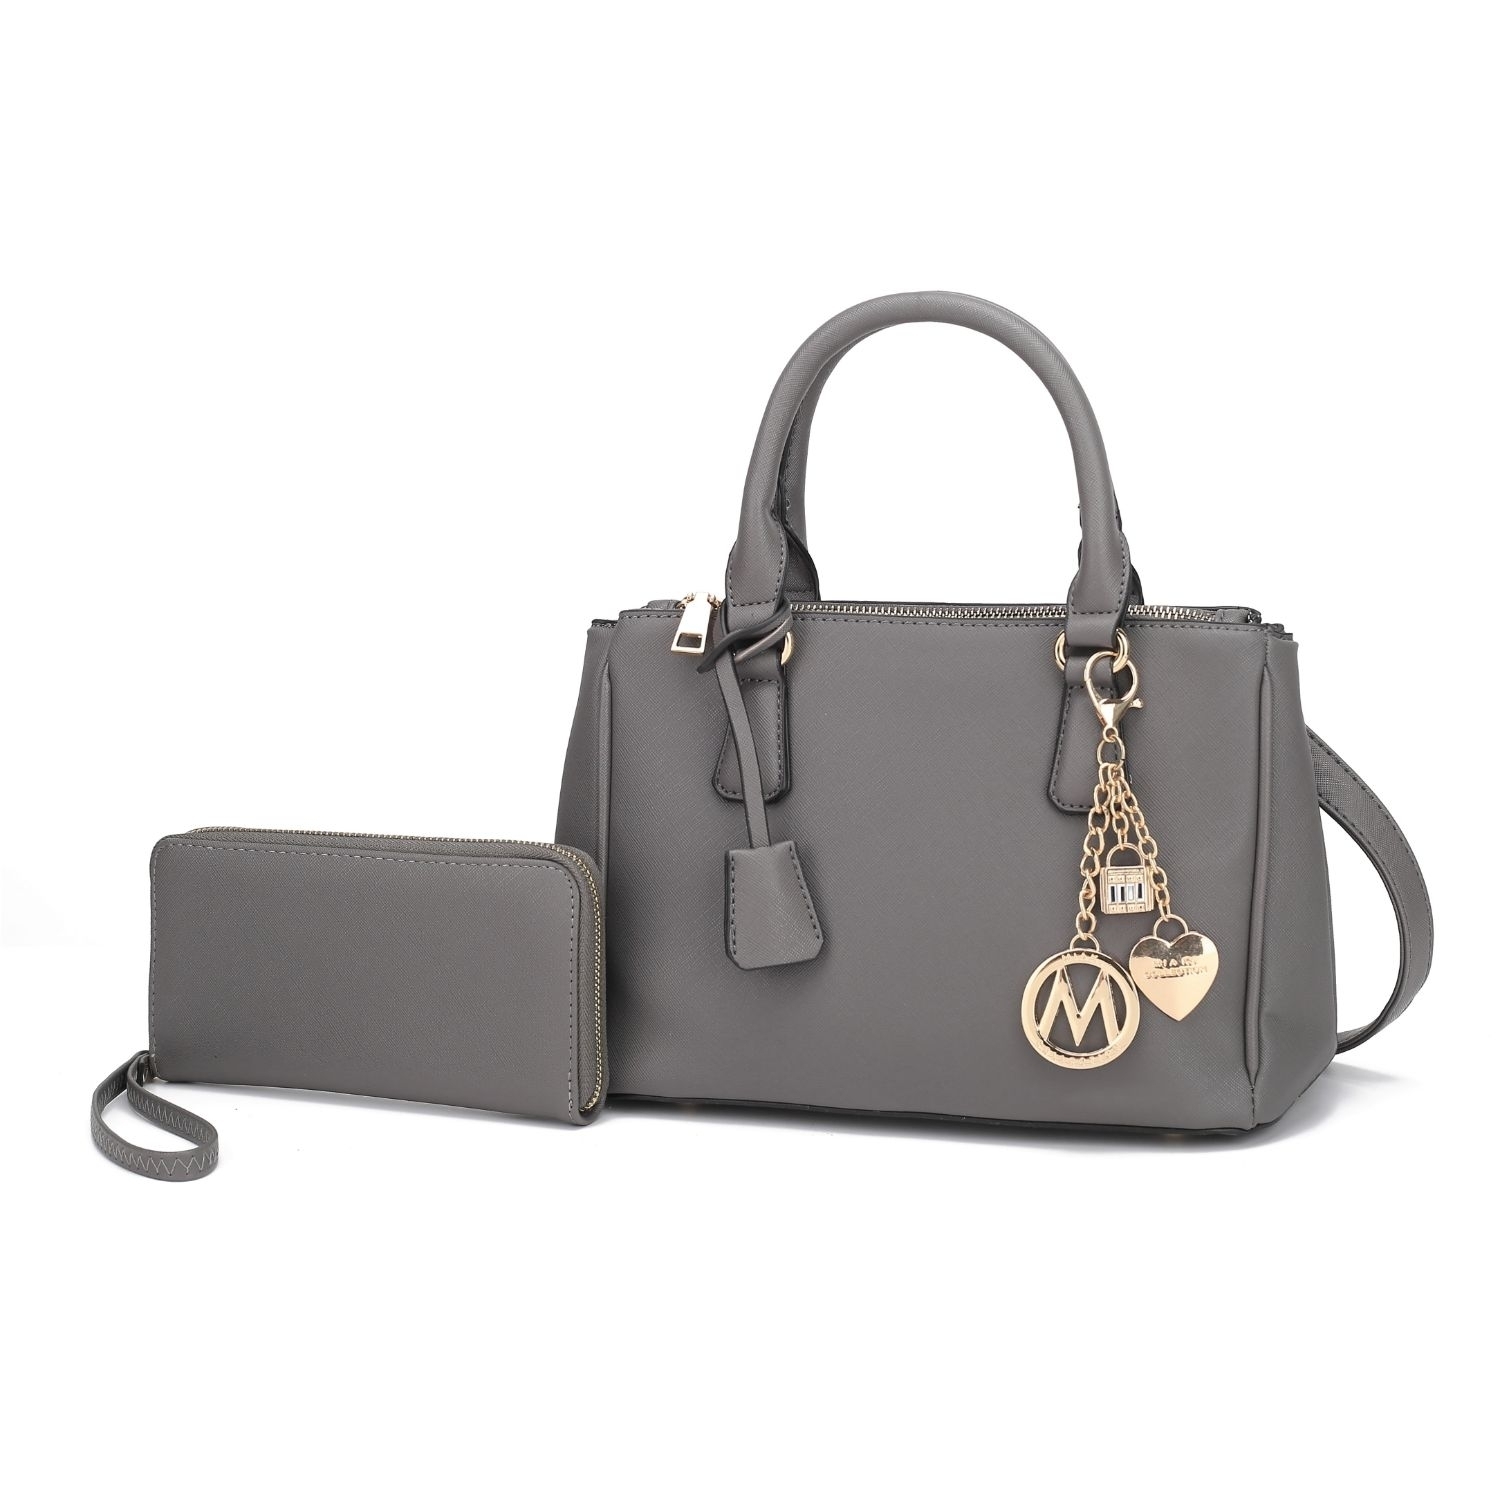 MKF Collection Cassandra Multi Compartment Satchel Handbag With Wallet By Mia K. - Charcoal